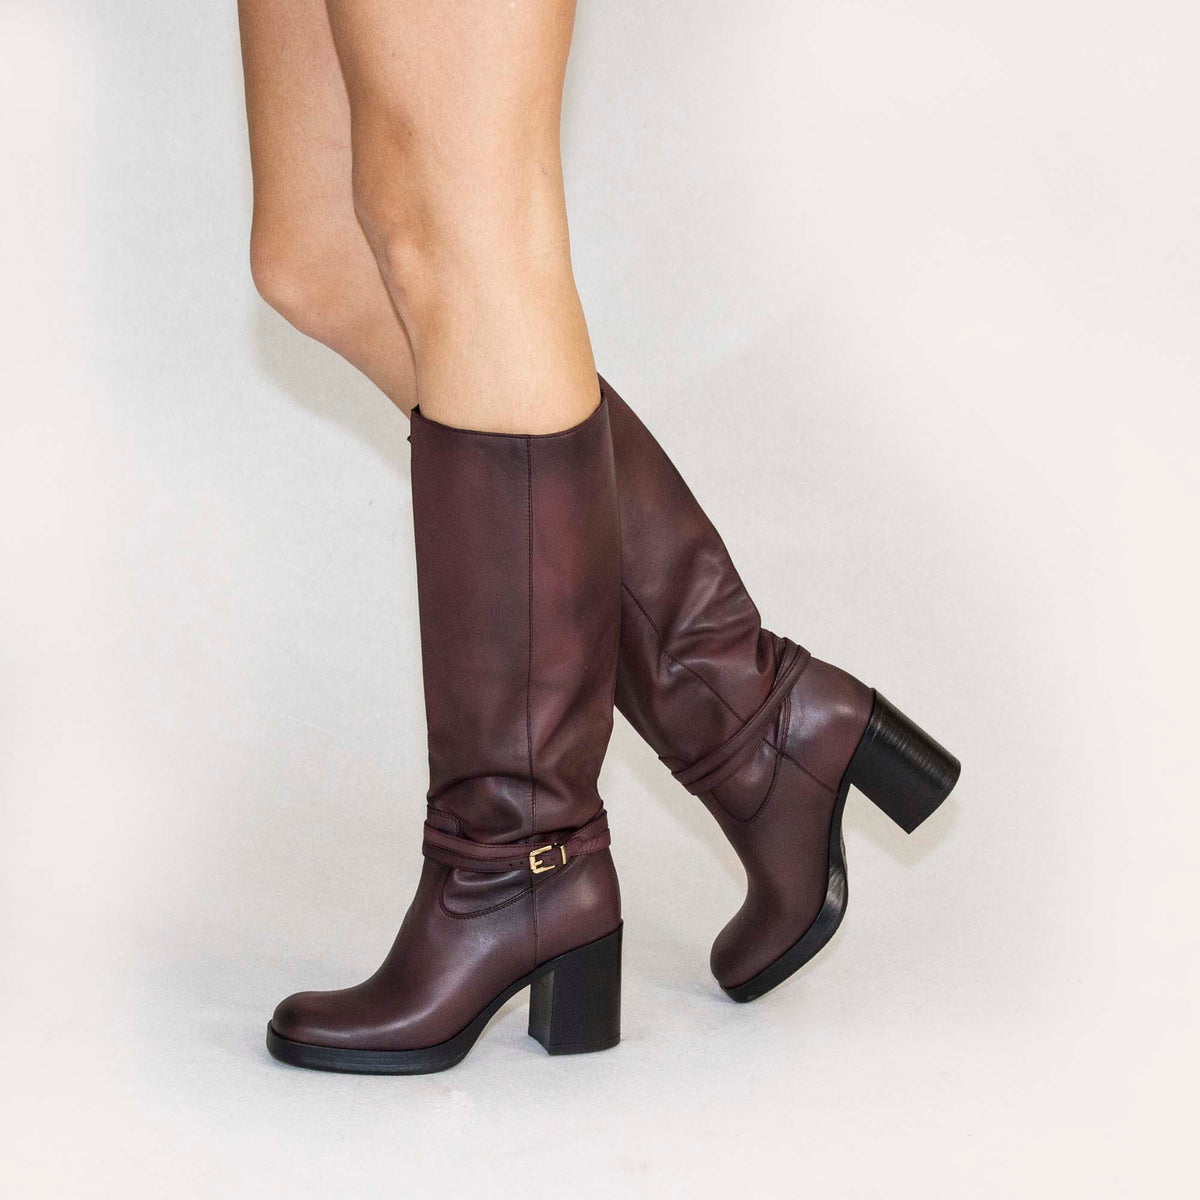 Women's boot with heel in burgundy leather and platform sole